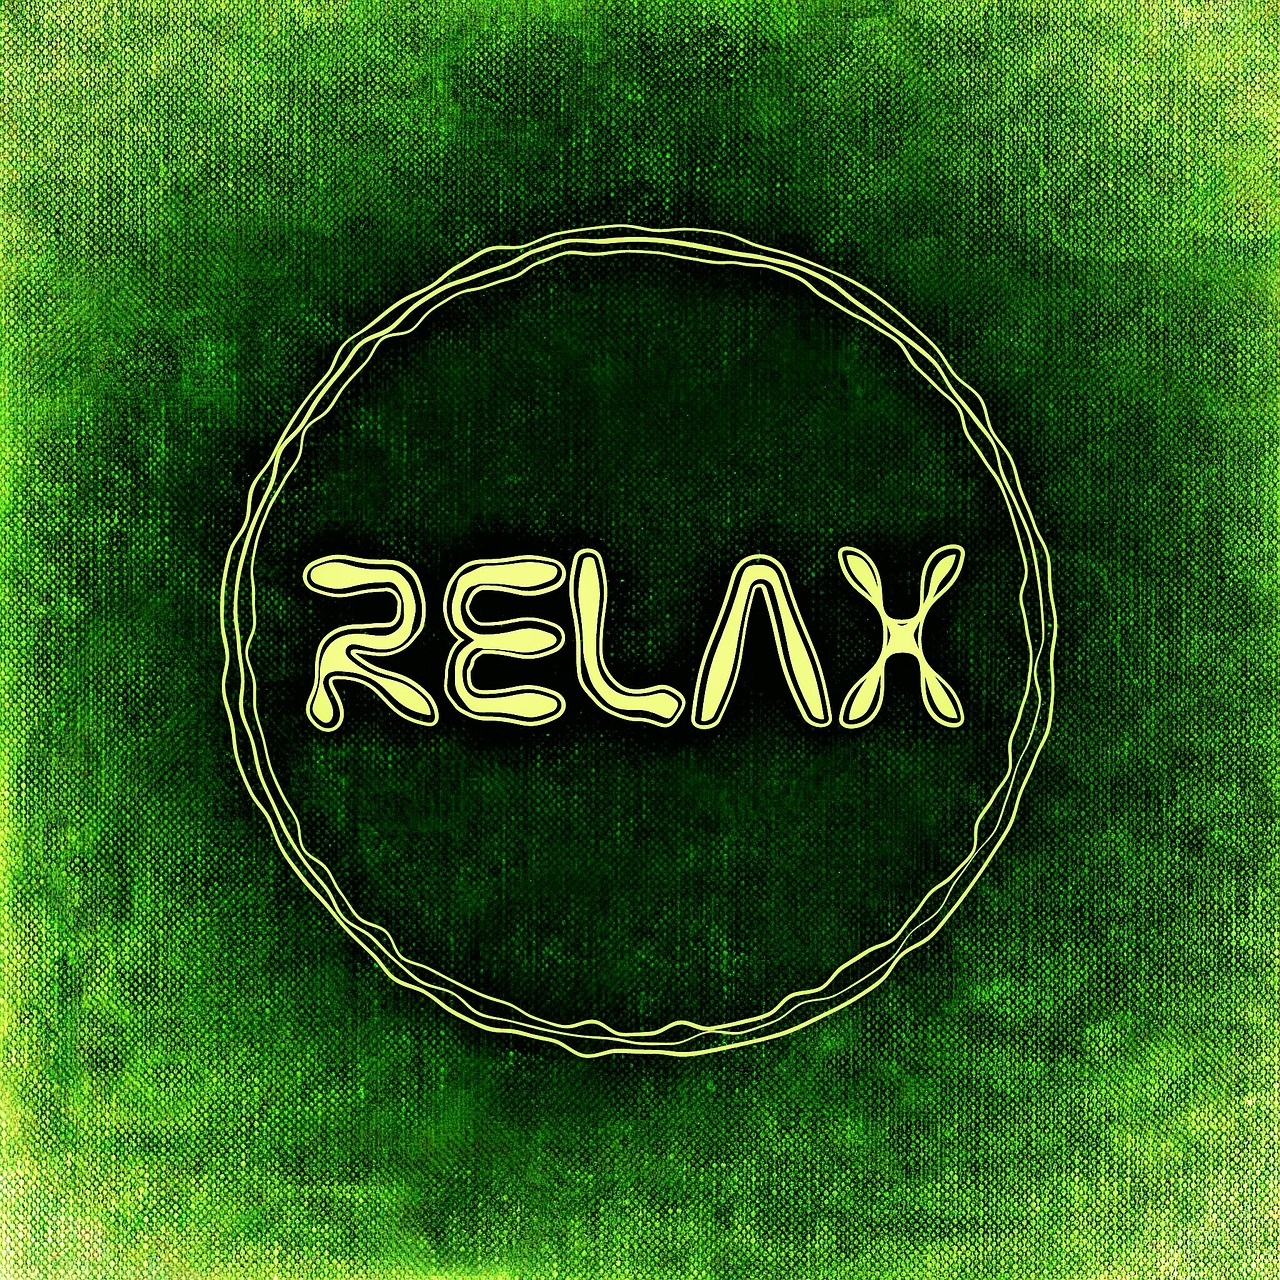 relax rest relaxation free photo